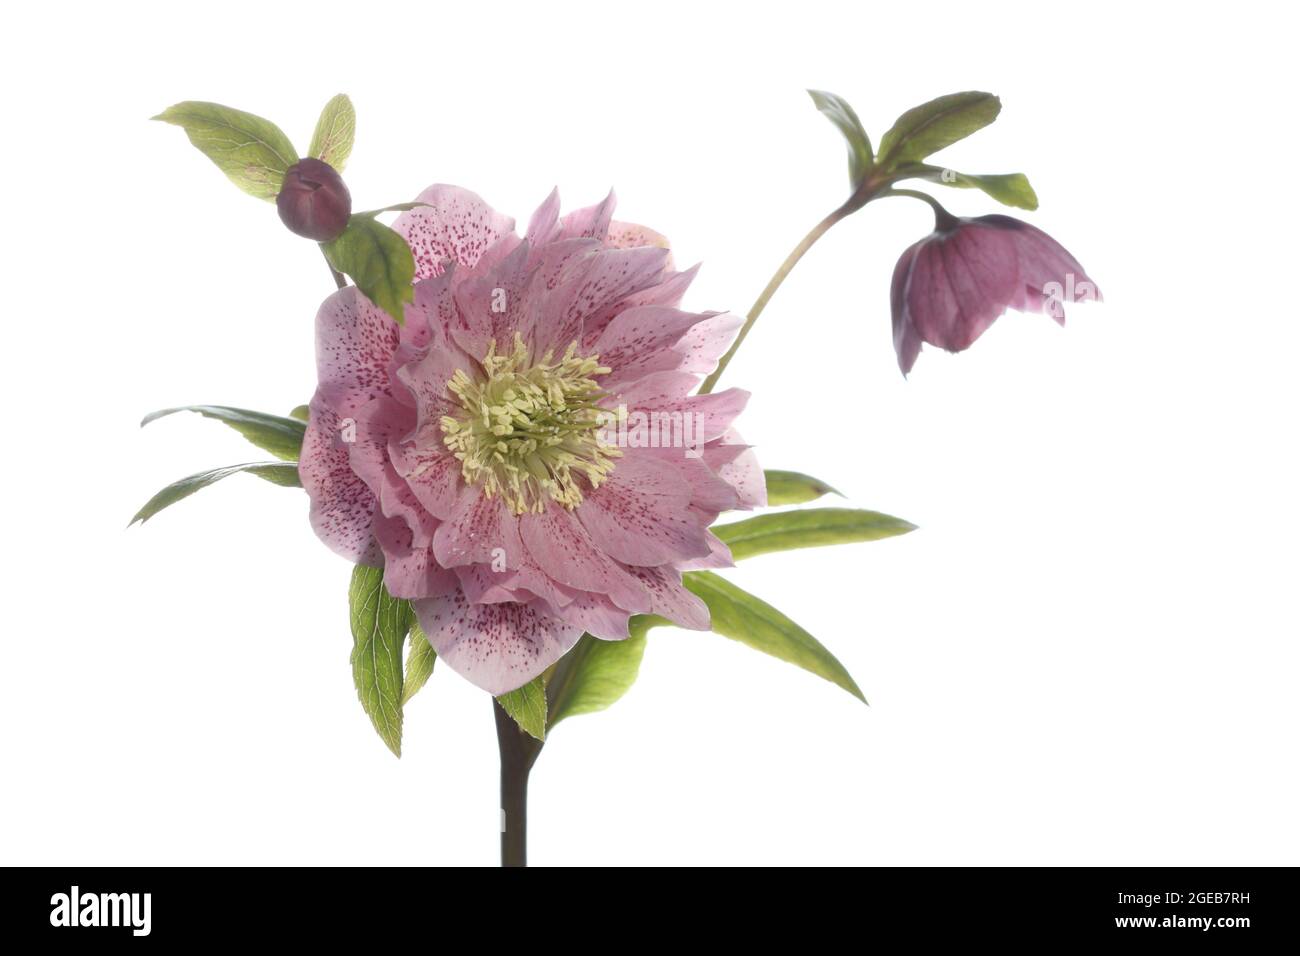 Open flower of a hellebore plant on a stem photographjed on a white backgopund Stock Photo